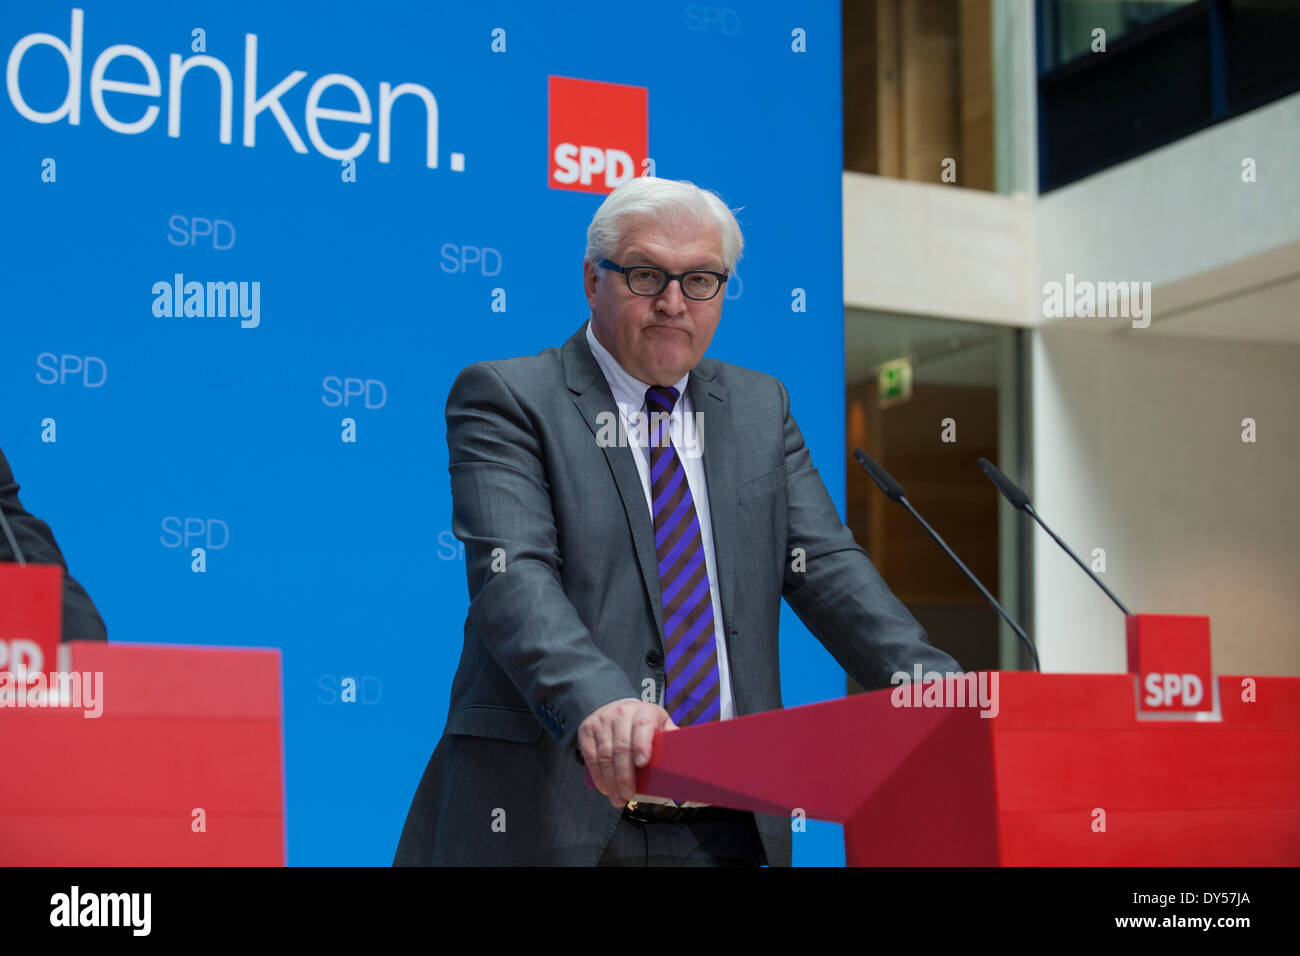 Berlin, Germany. 7th April, 2014. Joint press conference after the meeting of the SPD party executive with the party leader of SPD Sigmar Gabriel, the common top candidate of the European social democrats for the European election Martin Schulz and as well the Minister of Foreign Affairs Frank-Walter Steinmeier at Willy Brandt-Haus in Berlin. / Picture: Frank-Walter Steinmeier (SPD), German Foreign Minister. Stock Photo